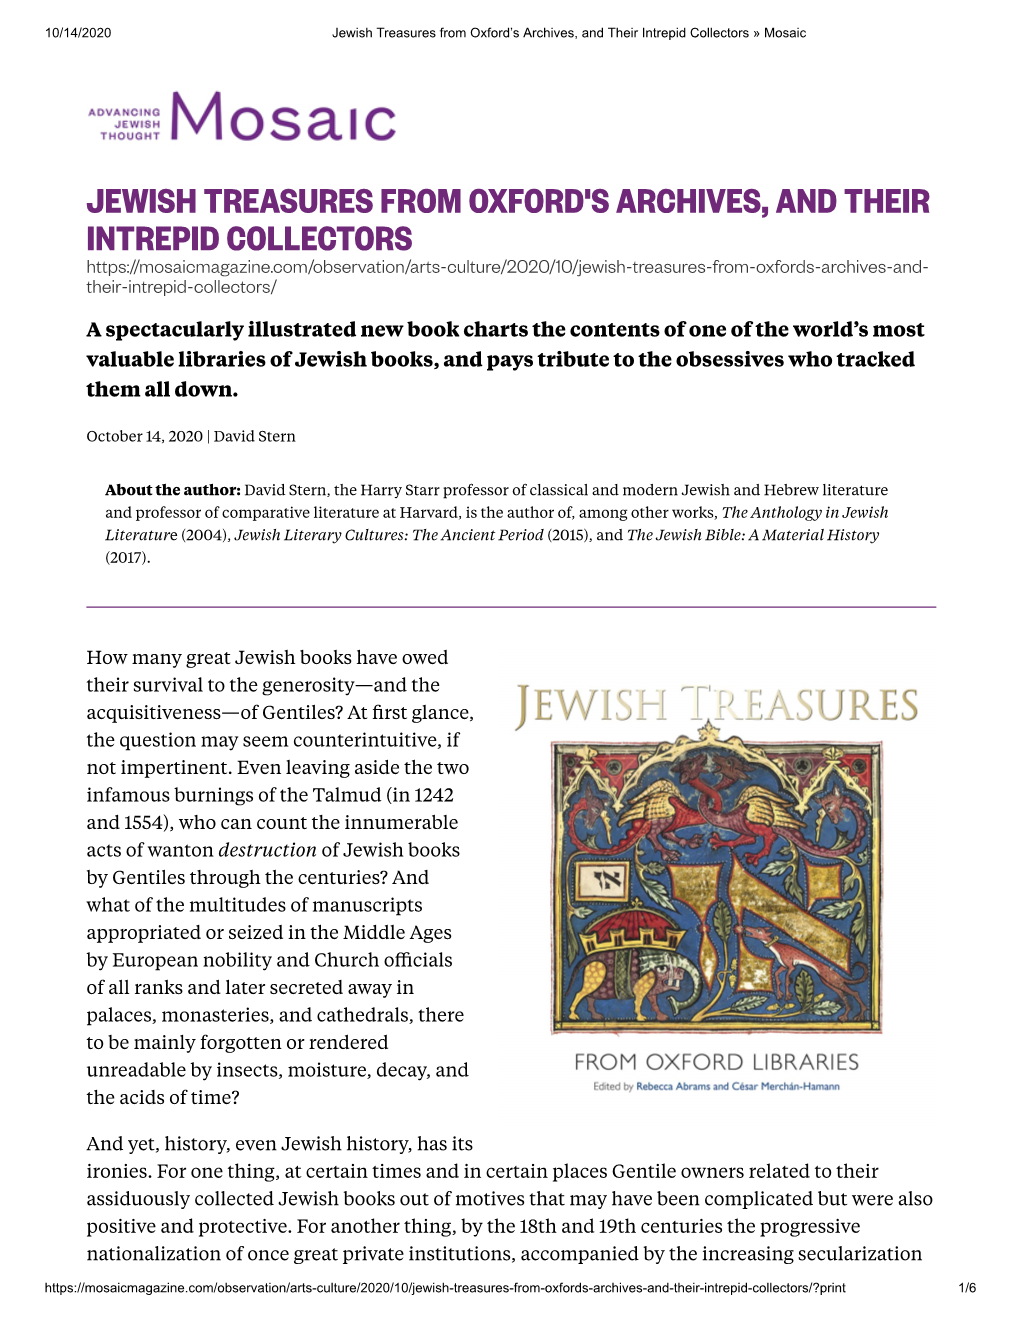 Jewish Treasures from Oxford's Archives, And